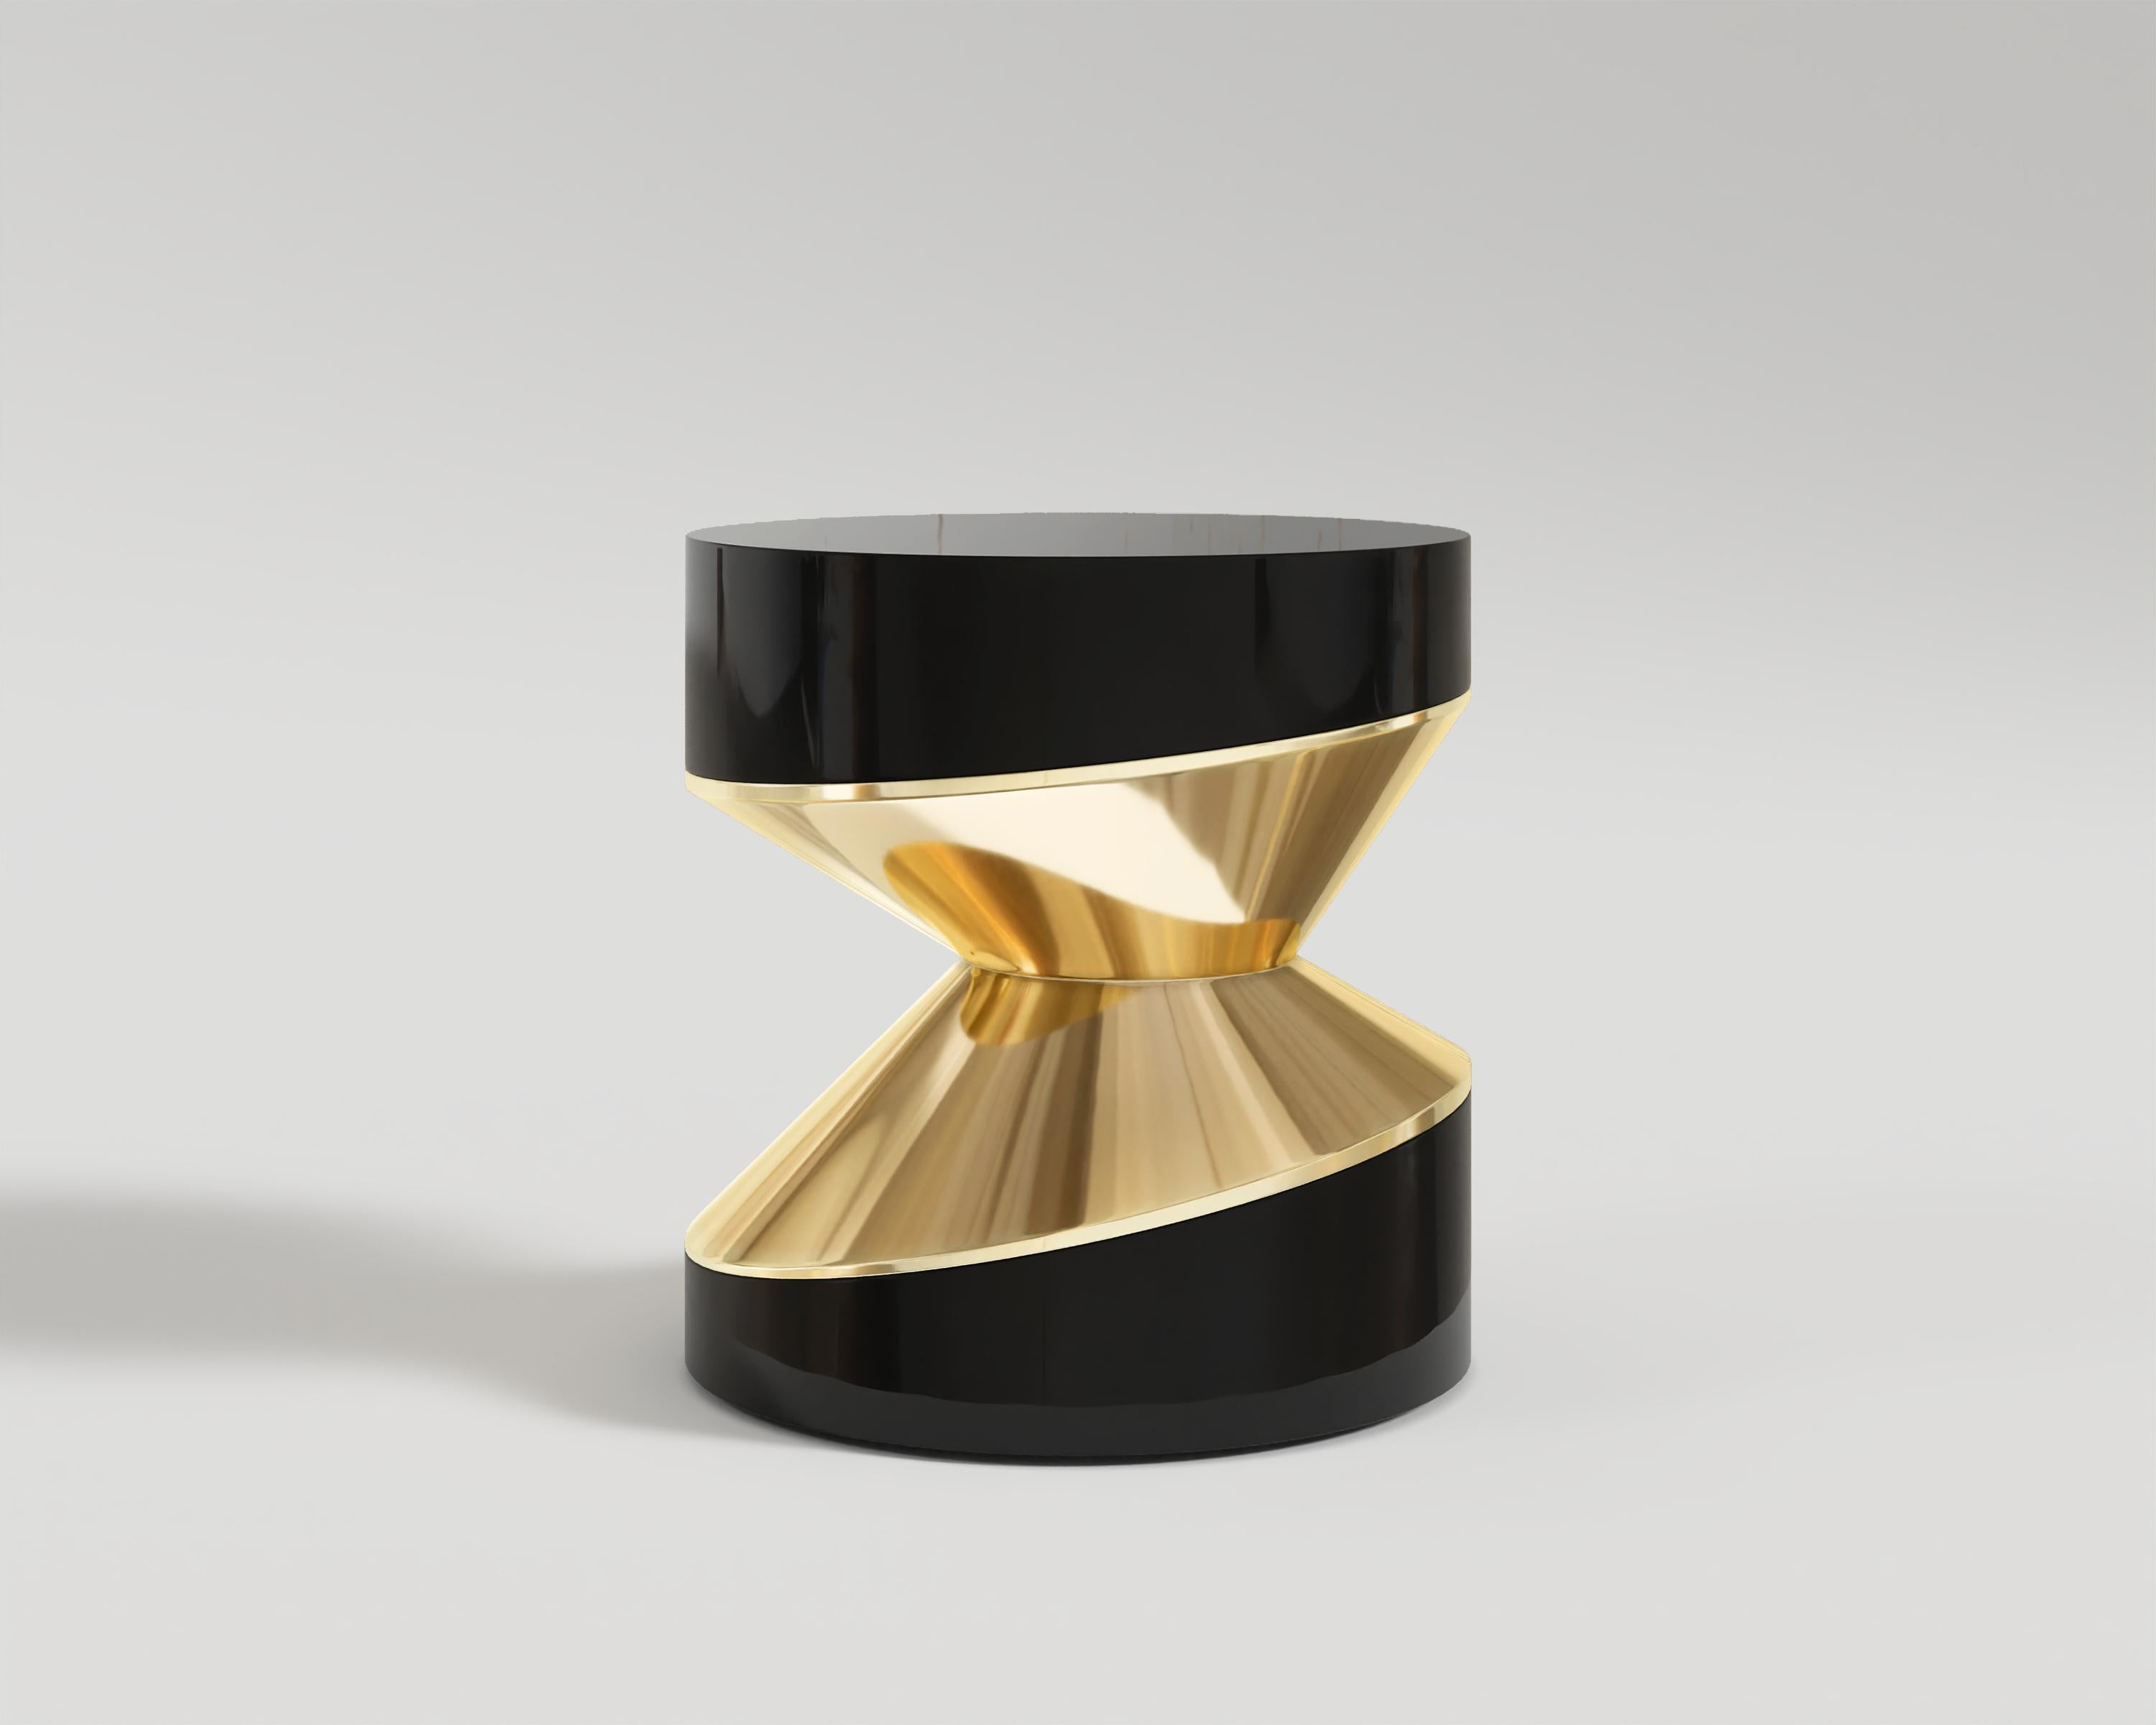 The “Linkage Side Table” is a luxurious masterpiece, blending polished bronze and sleek black lacquer to create a striking and opulent addition to your living space.

Materials and sizes are customizable upon the customer's personal